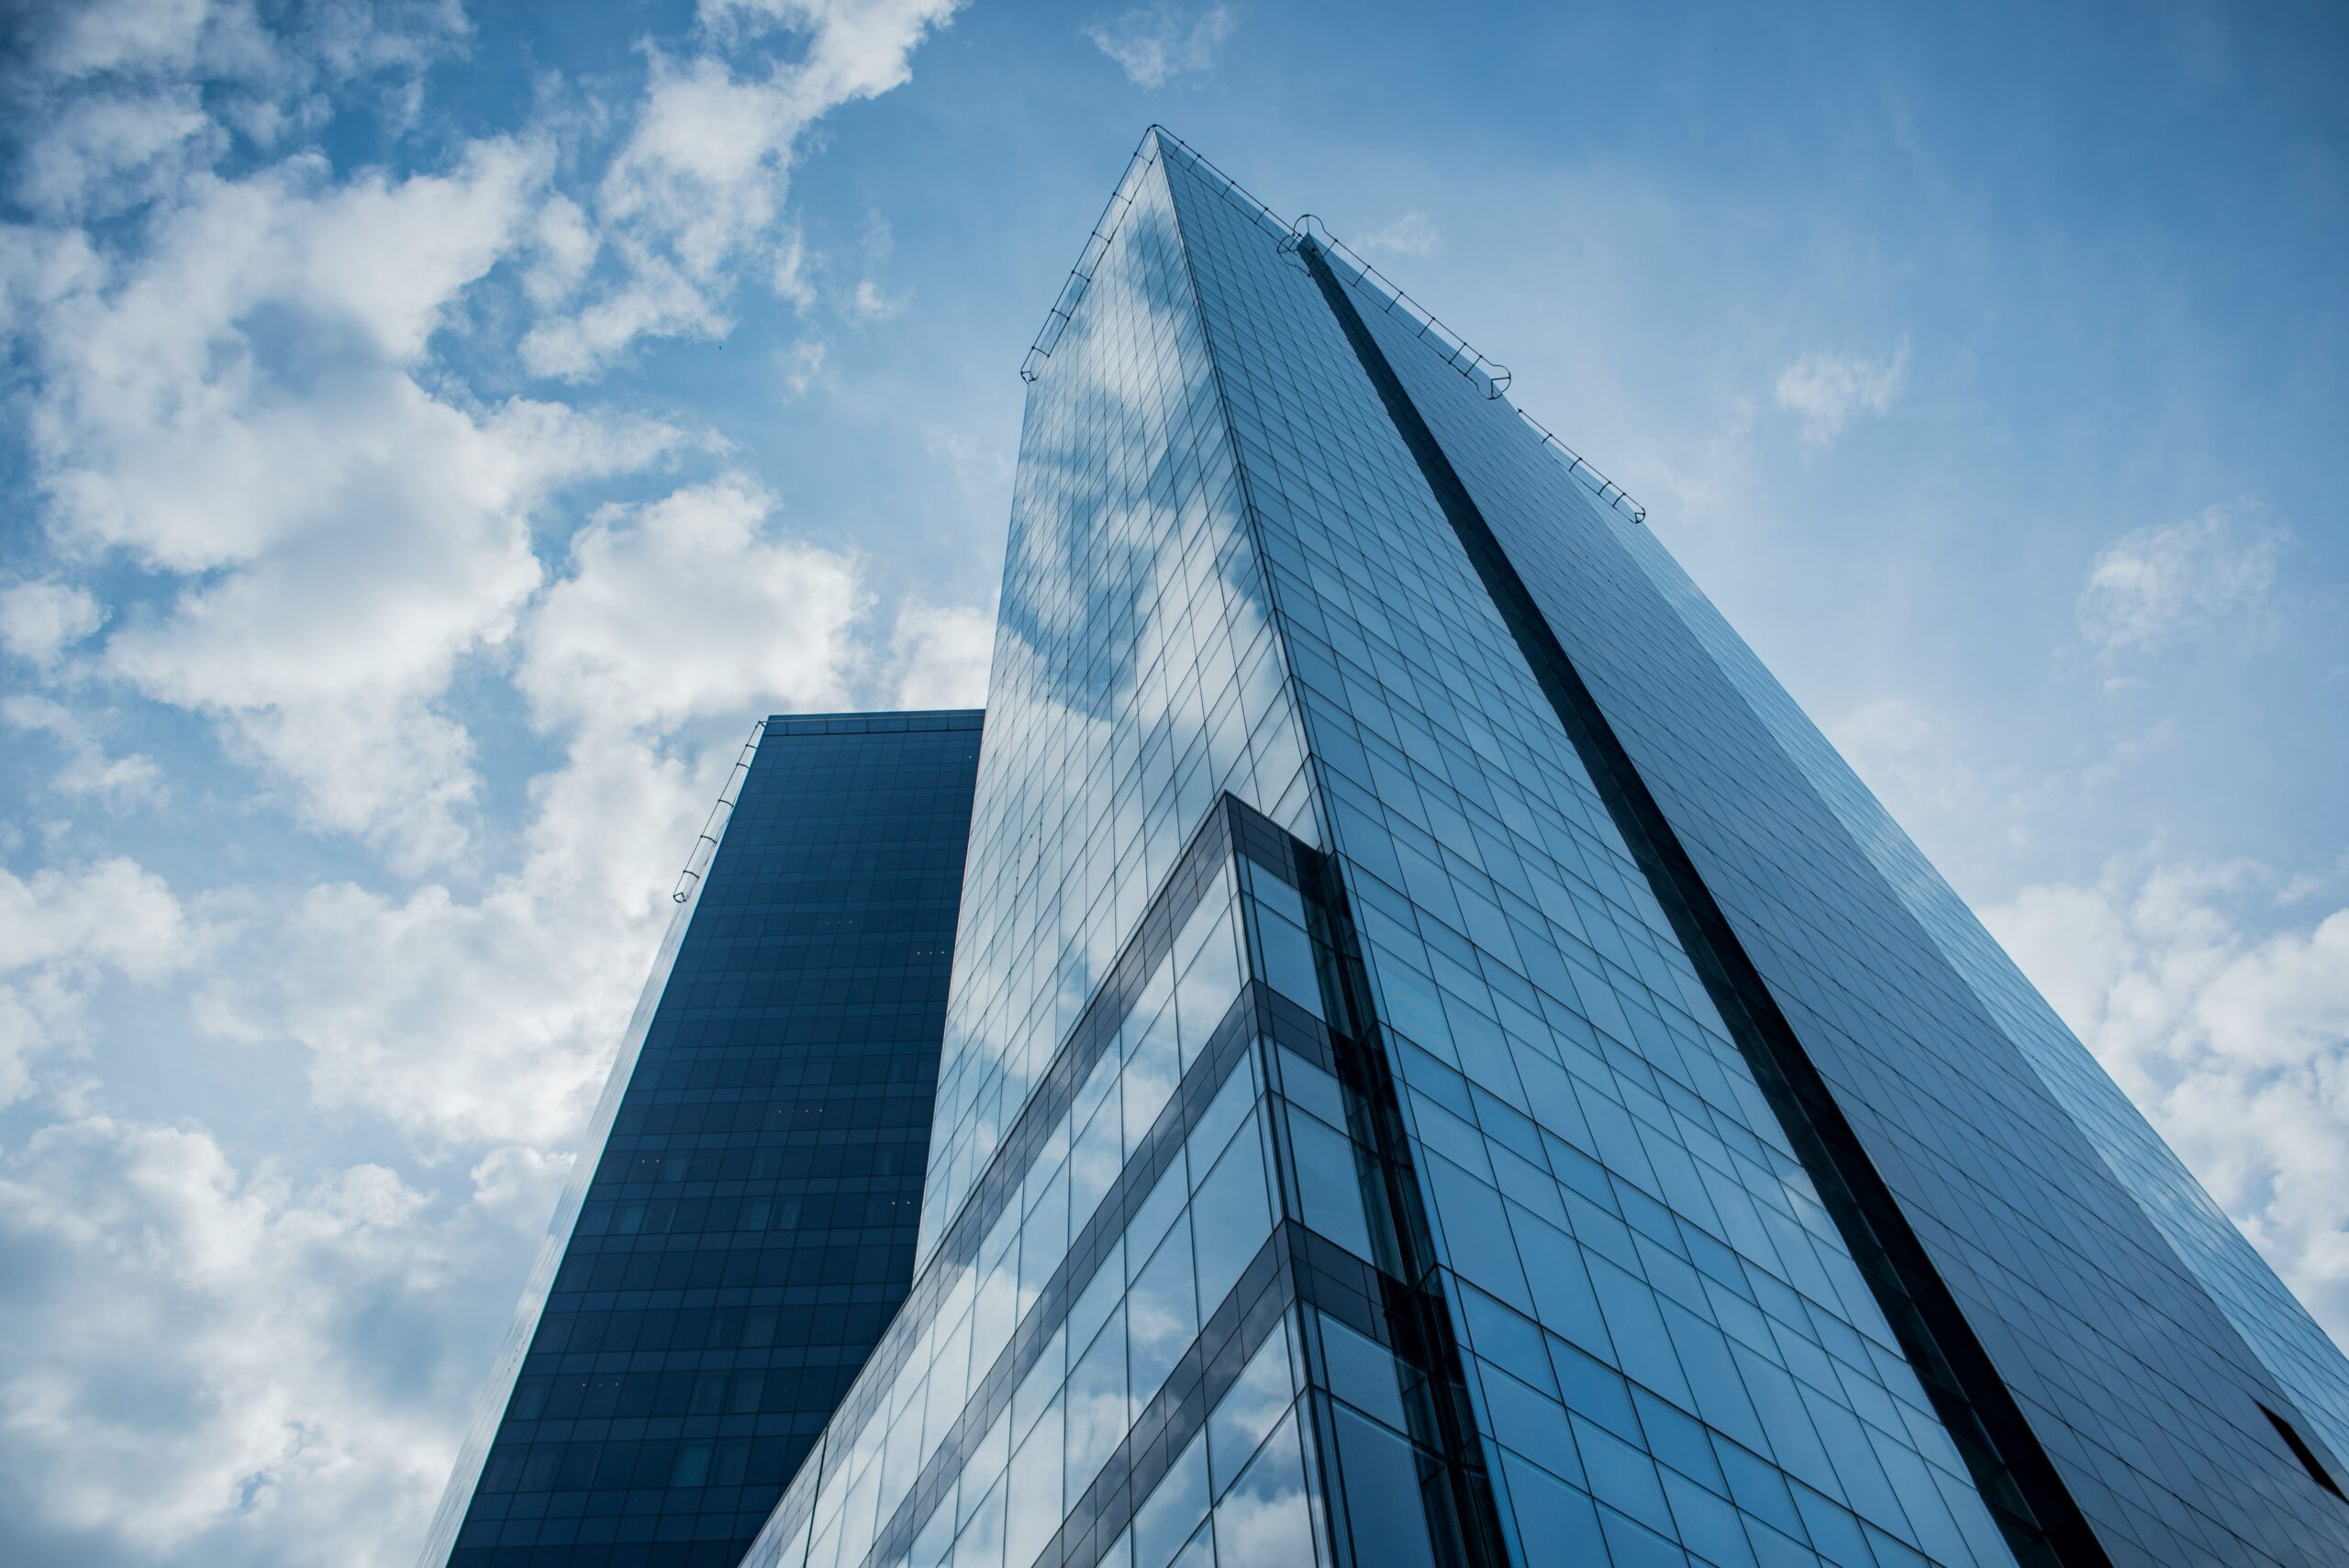 Commercial Real Estate’s Banking Impact: Just Beginning